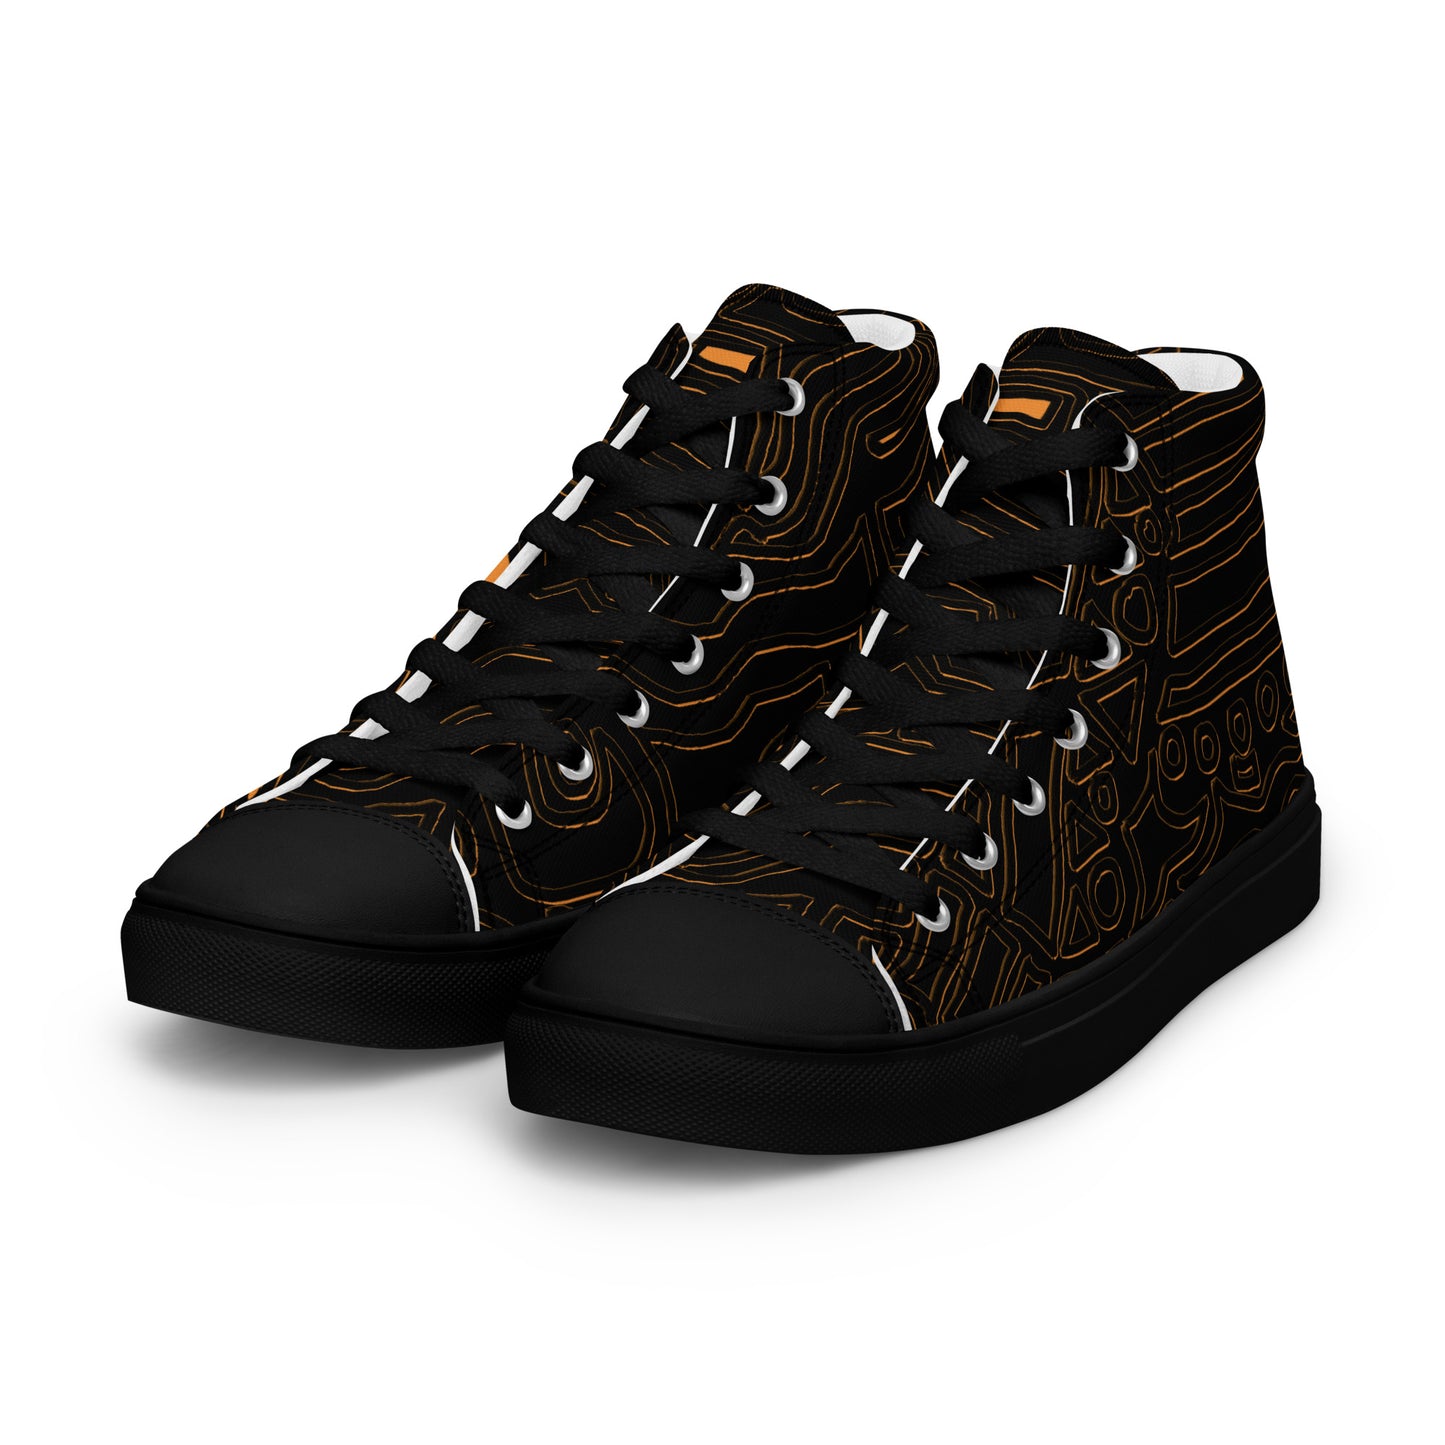 Obatala - Women's high canvas sneakers